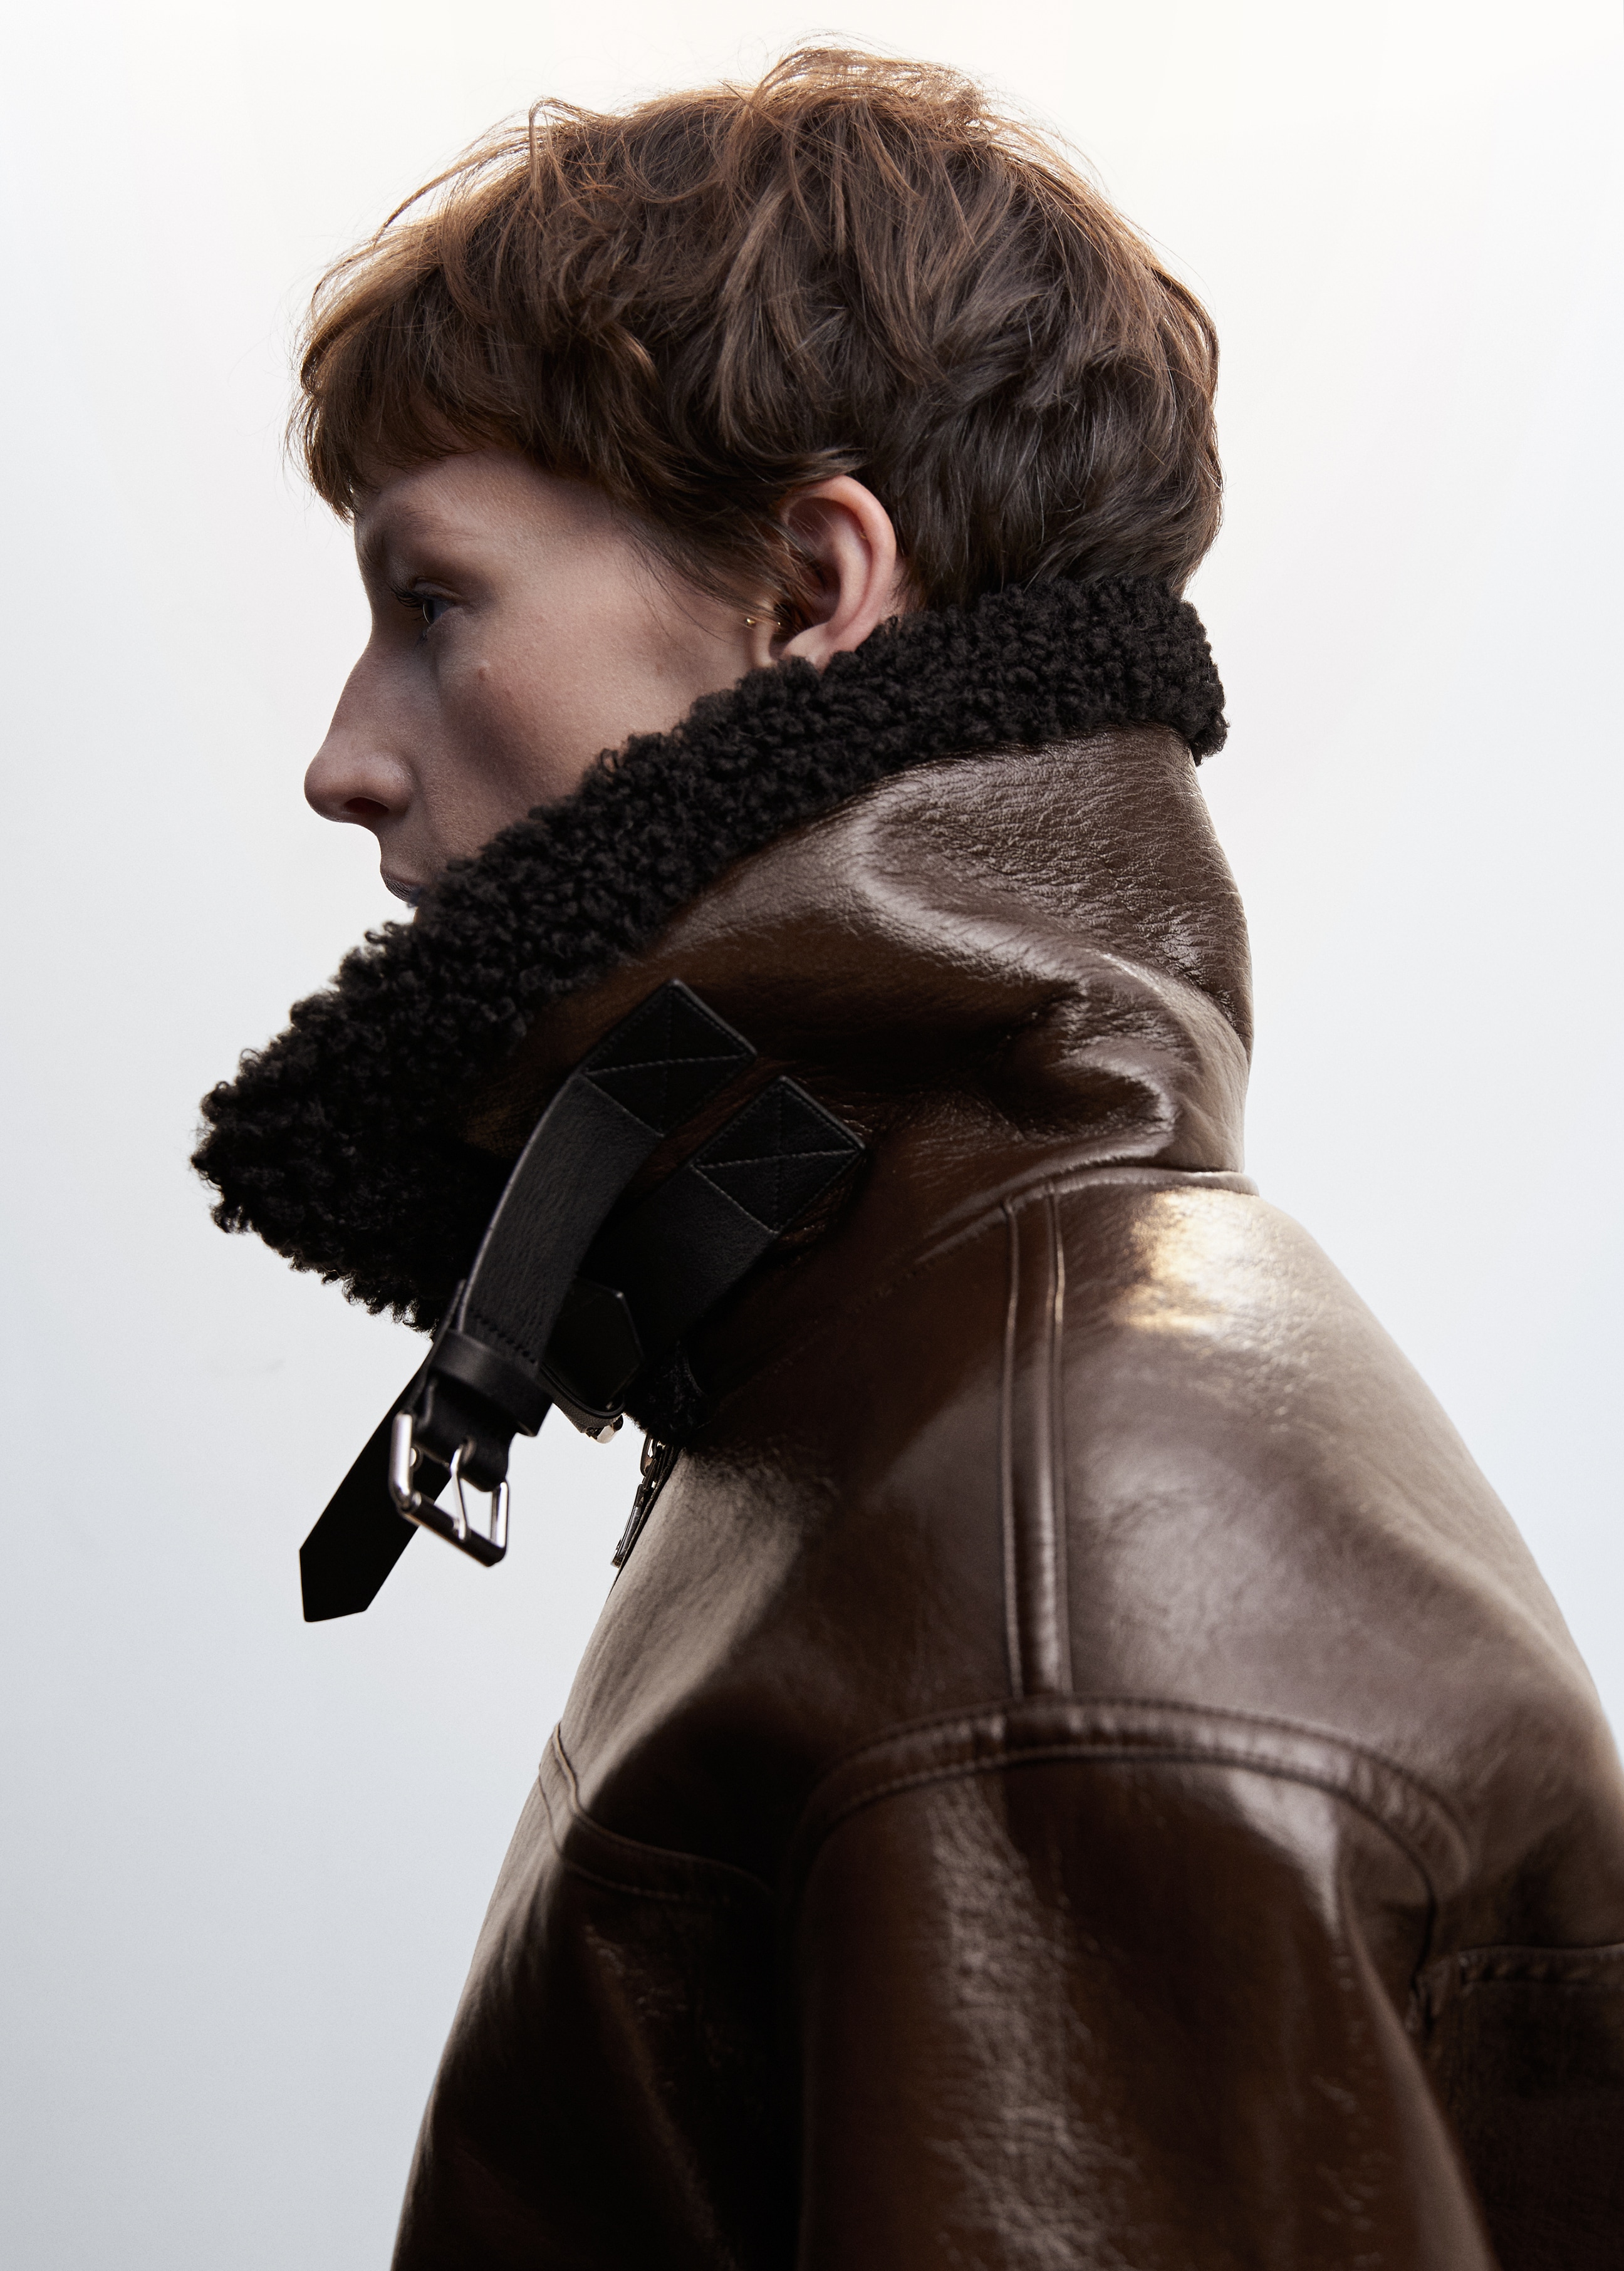 Faux shearling-lined jacket - Details of the article 6